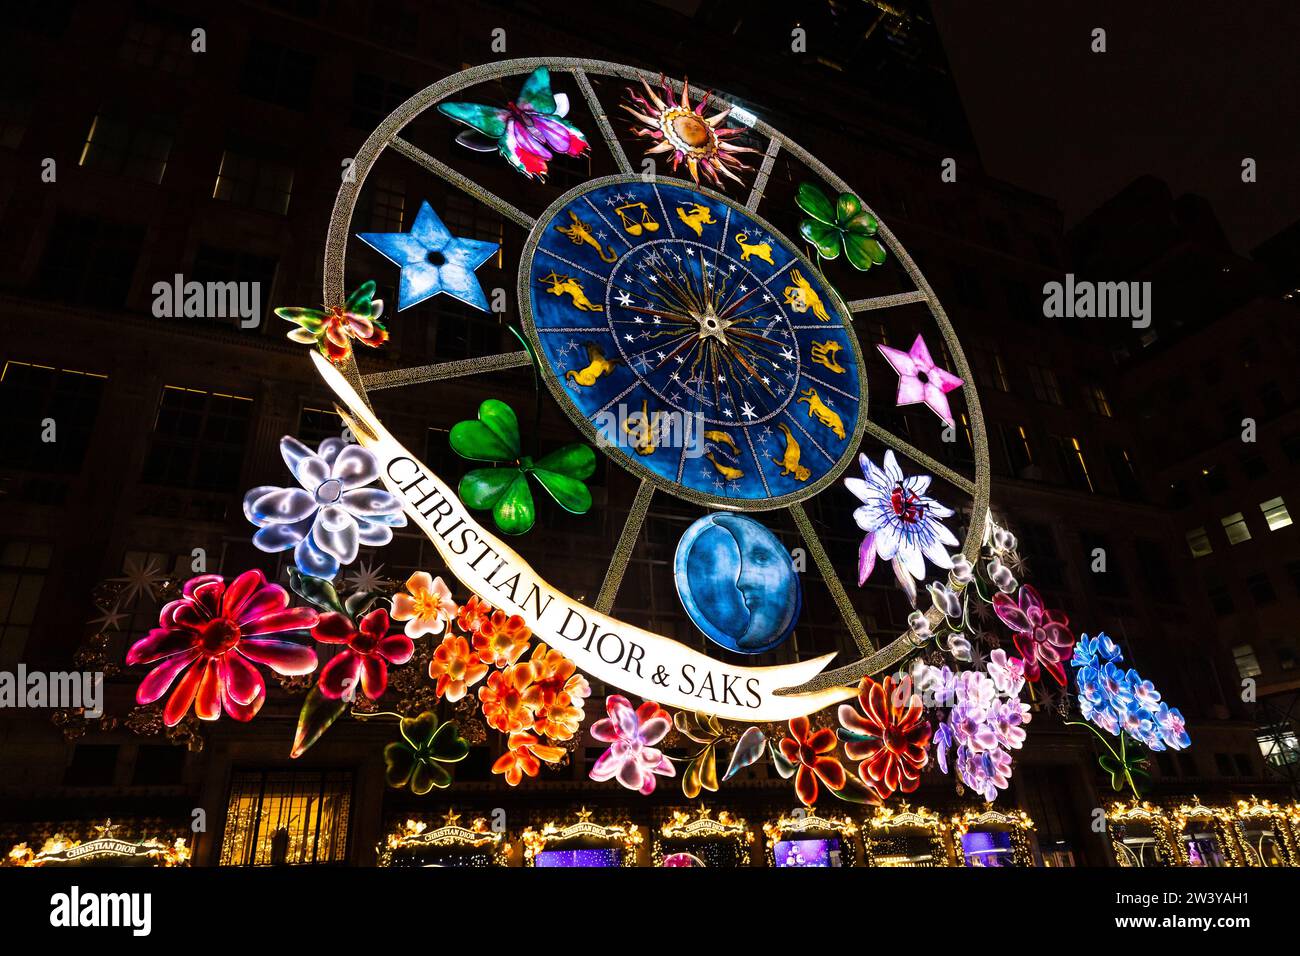 Christian Dior and Saks have displayed this Dior's Carousel of Dreams on the Saks Fifth Avenue store at night. Stock Photo